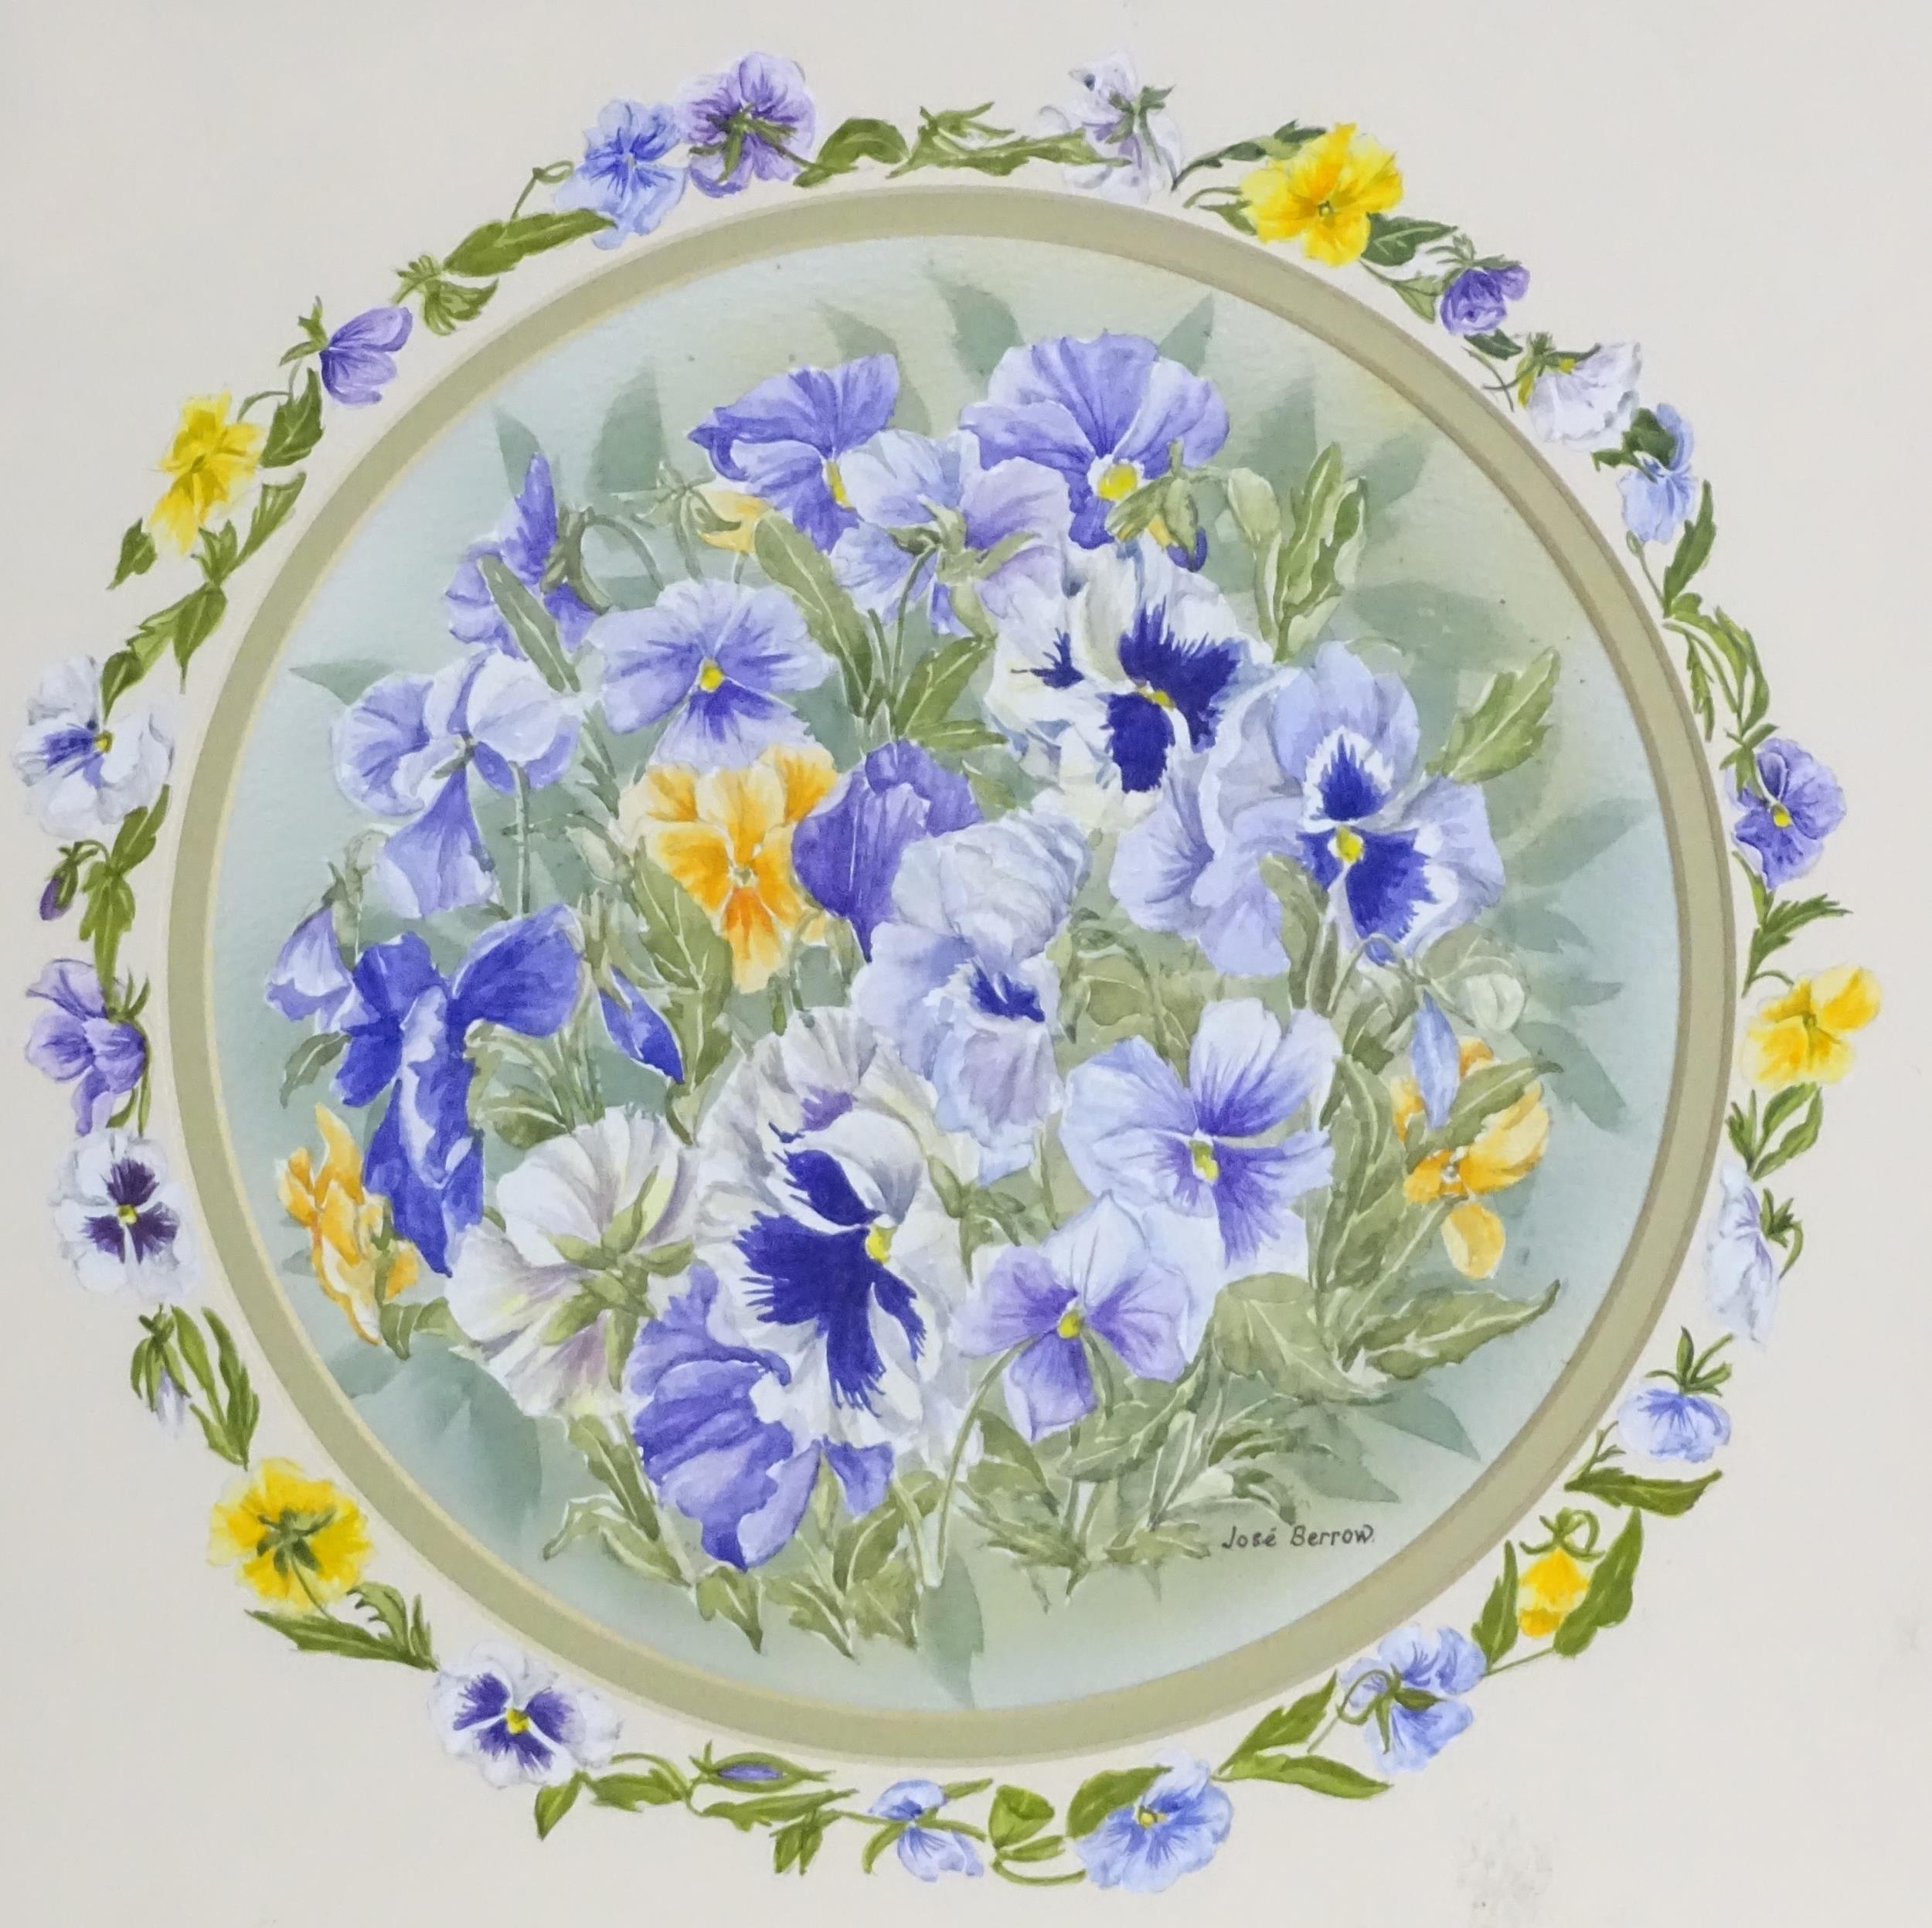 Jose Berrow, 20th century, Watercolour, A pansy garland, with floral border. Signed lower right. - Image 3 of 4